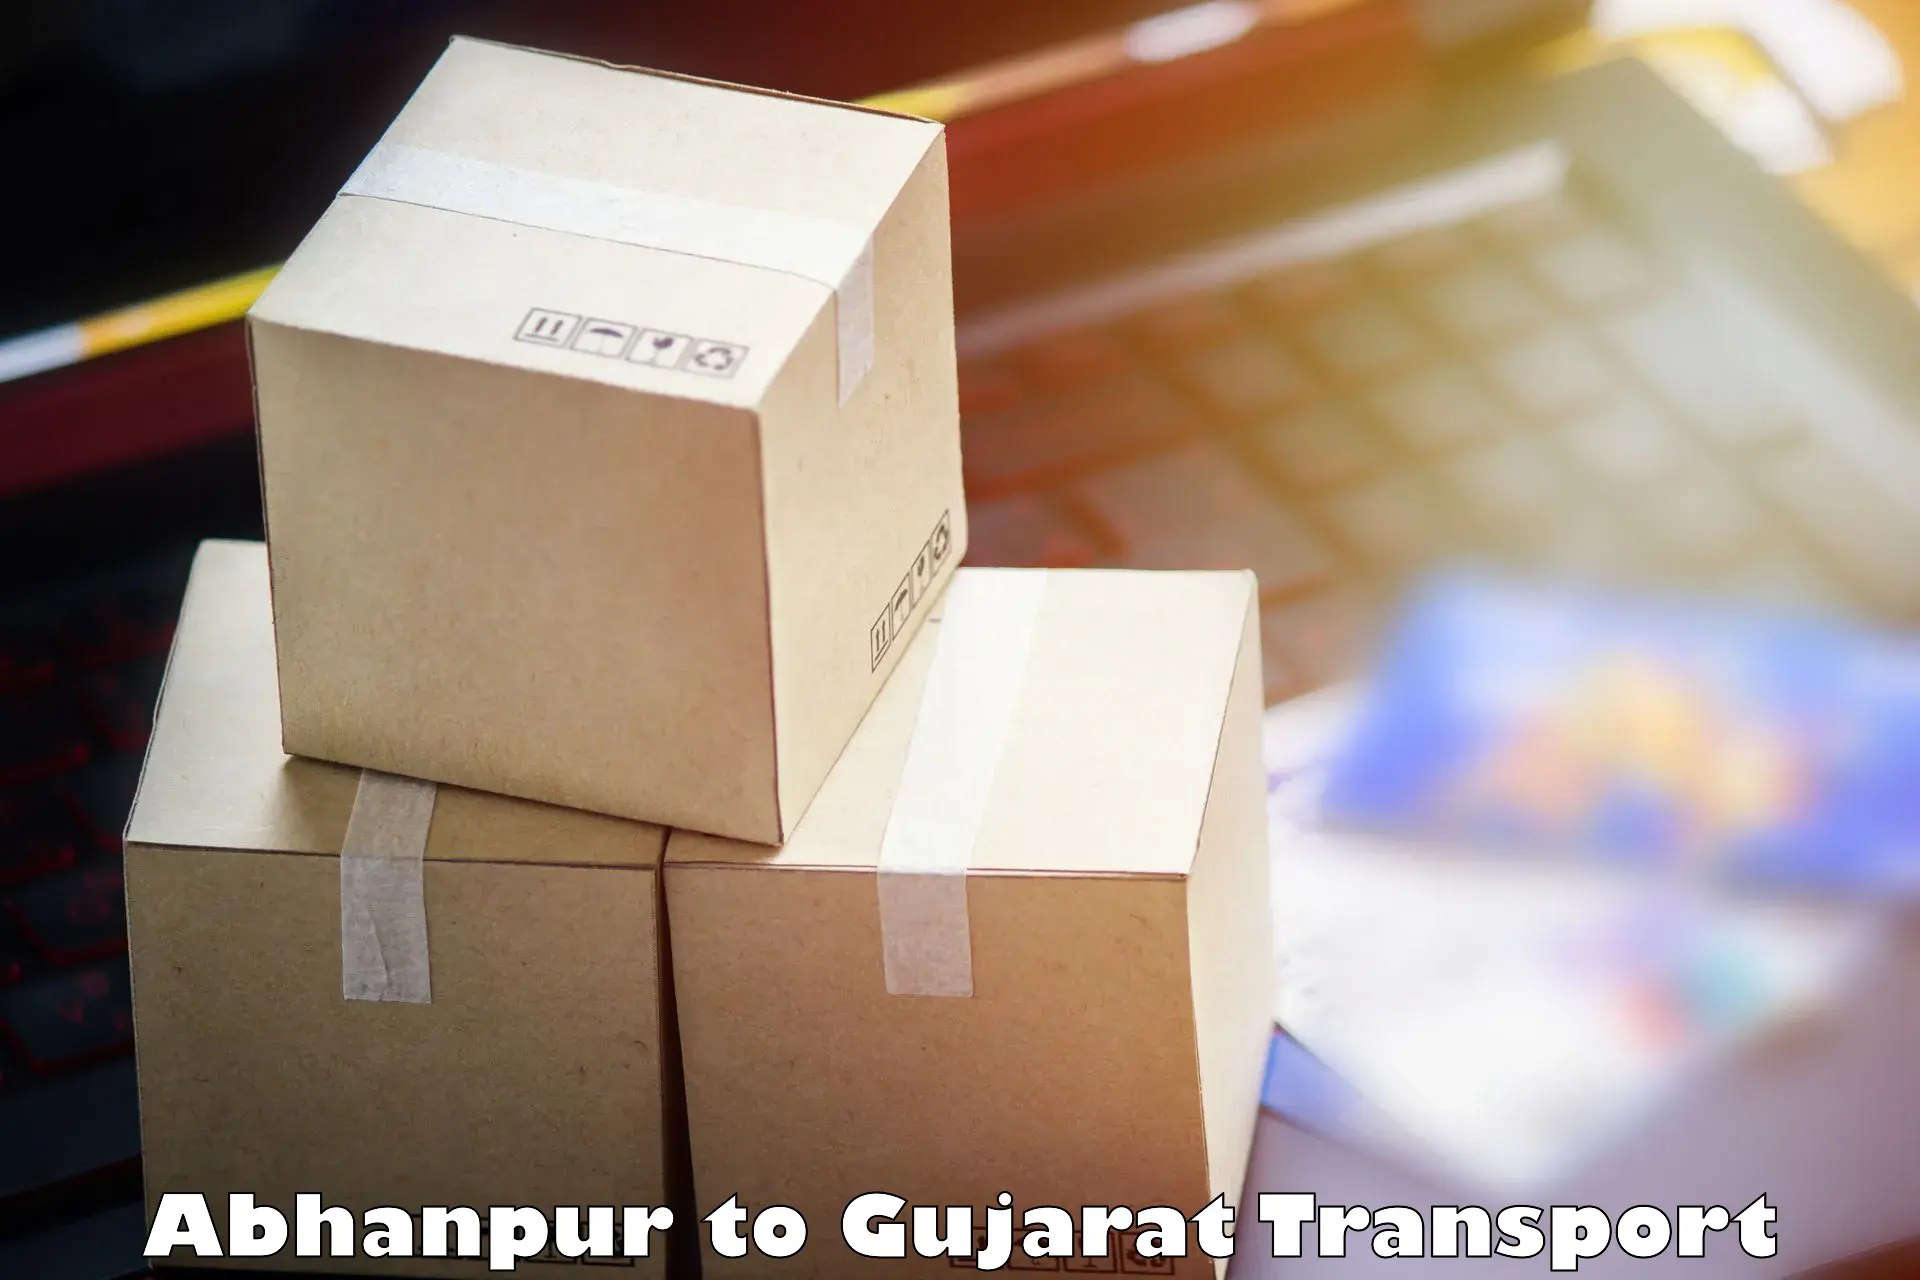 Land transport services Abhanpur to GIDC